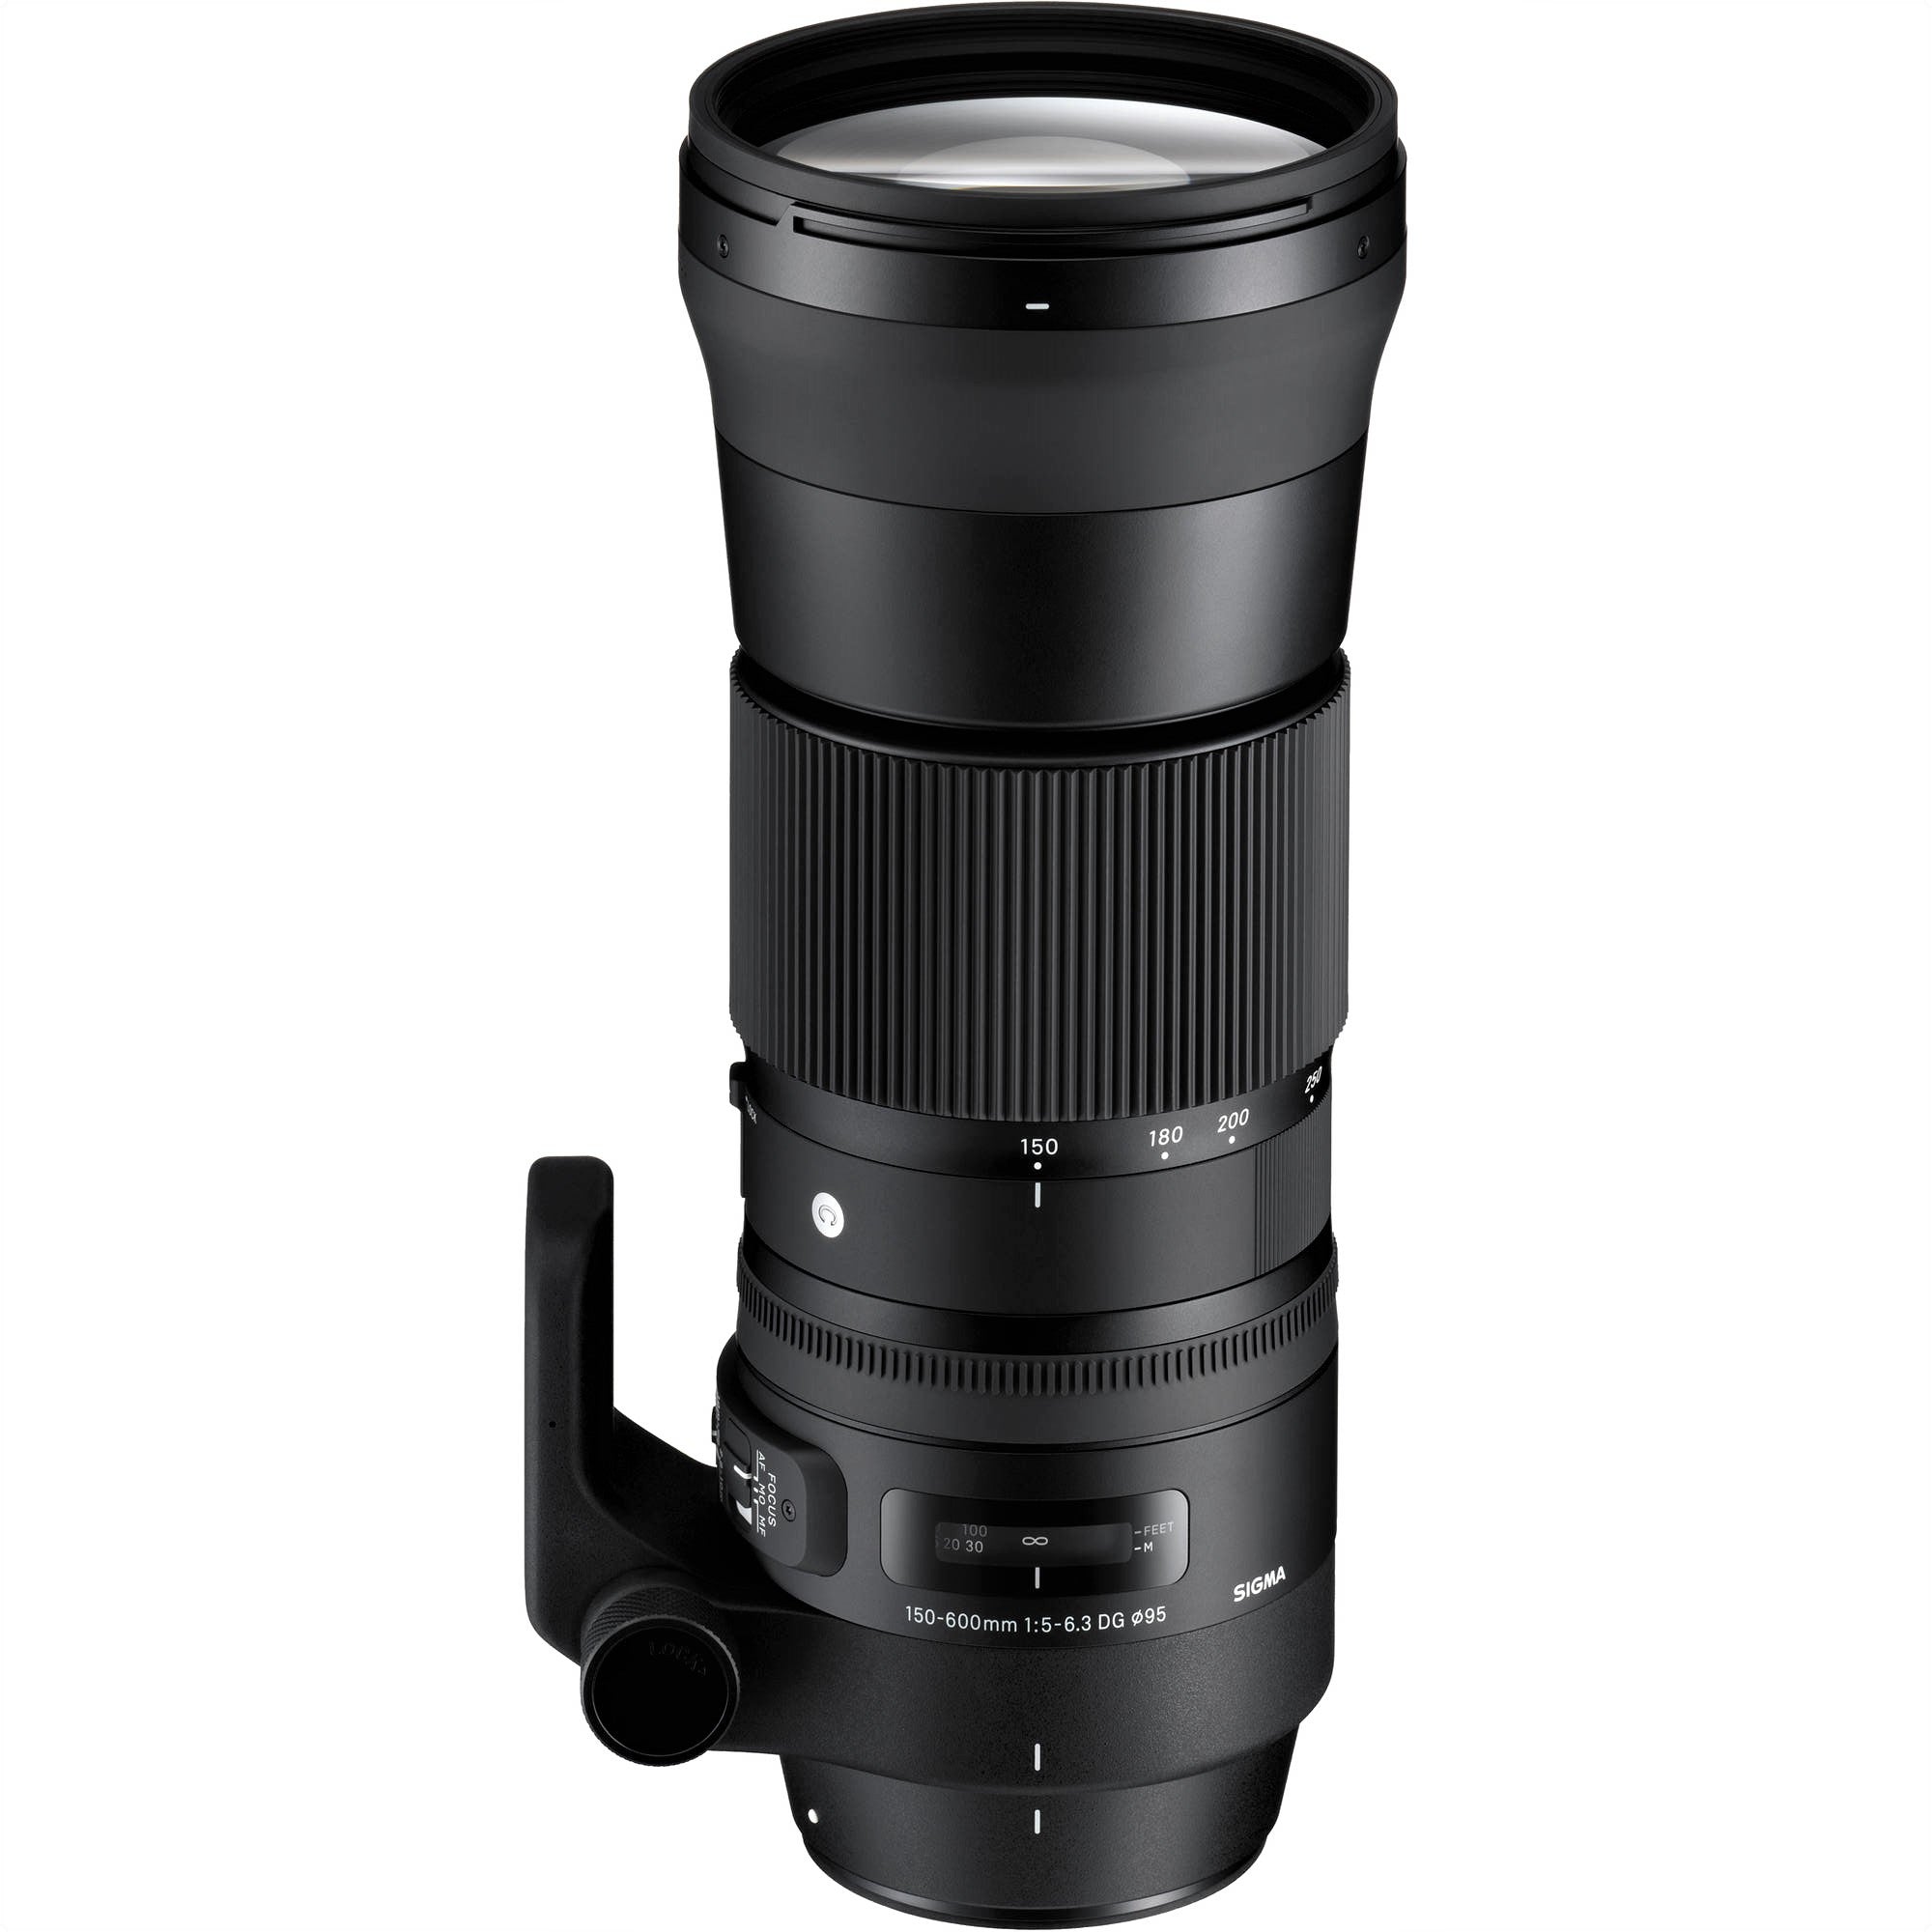 Sigma 150-600mm f/5-6.3 DG OS HSM Contemporary Lens for Nikon F - Attached Tripod Collar